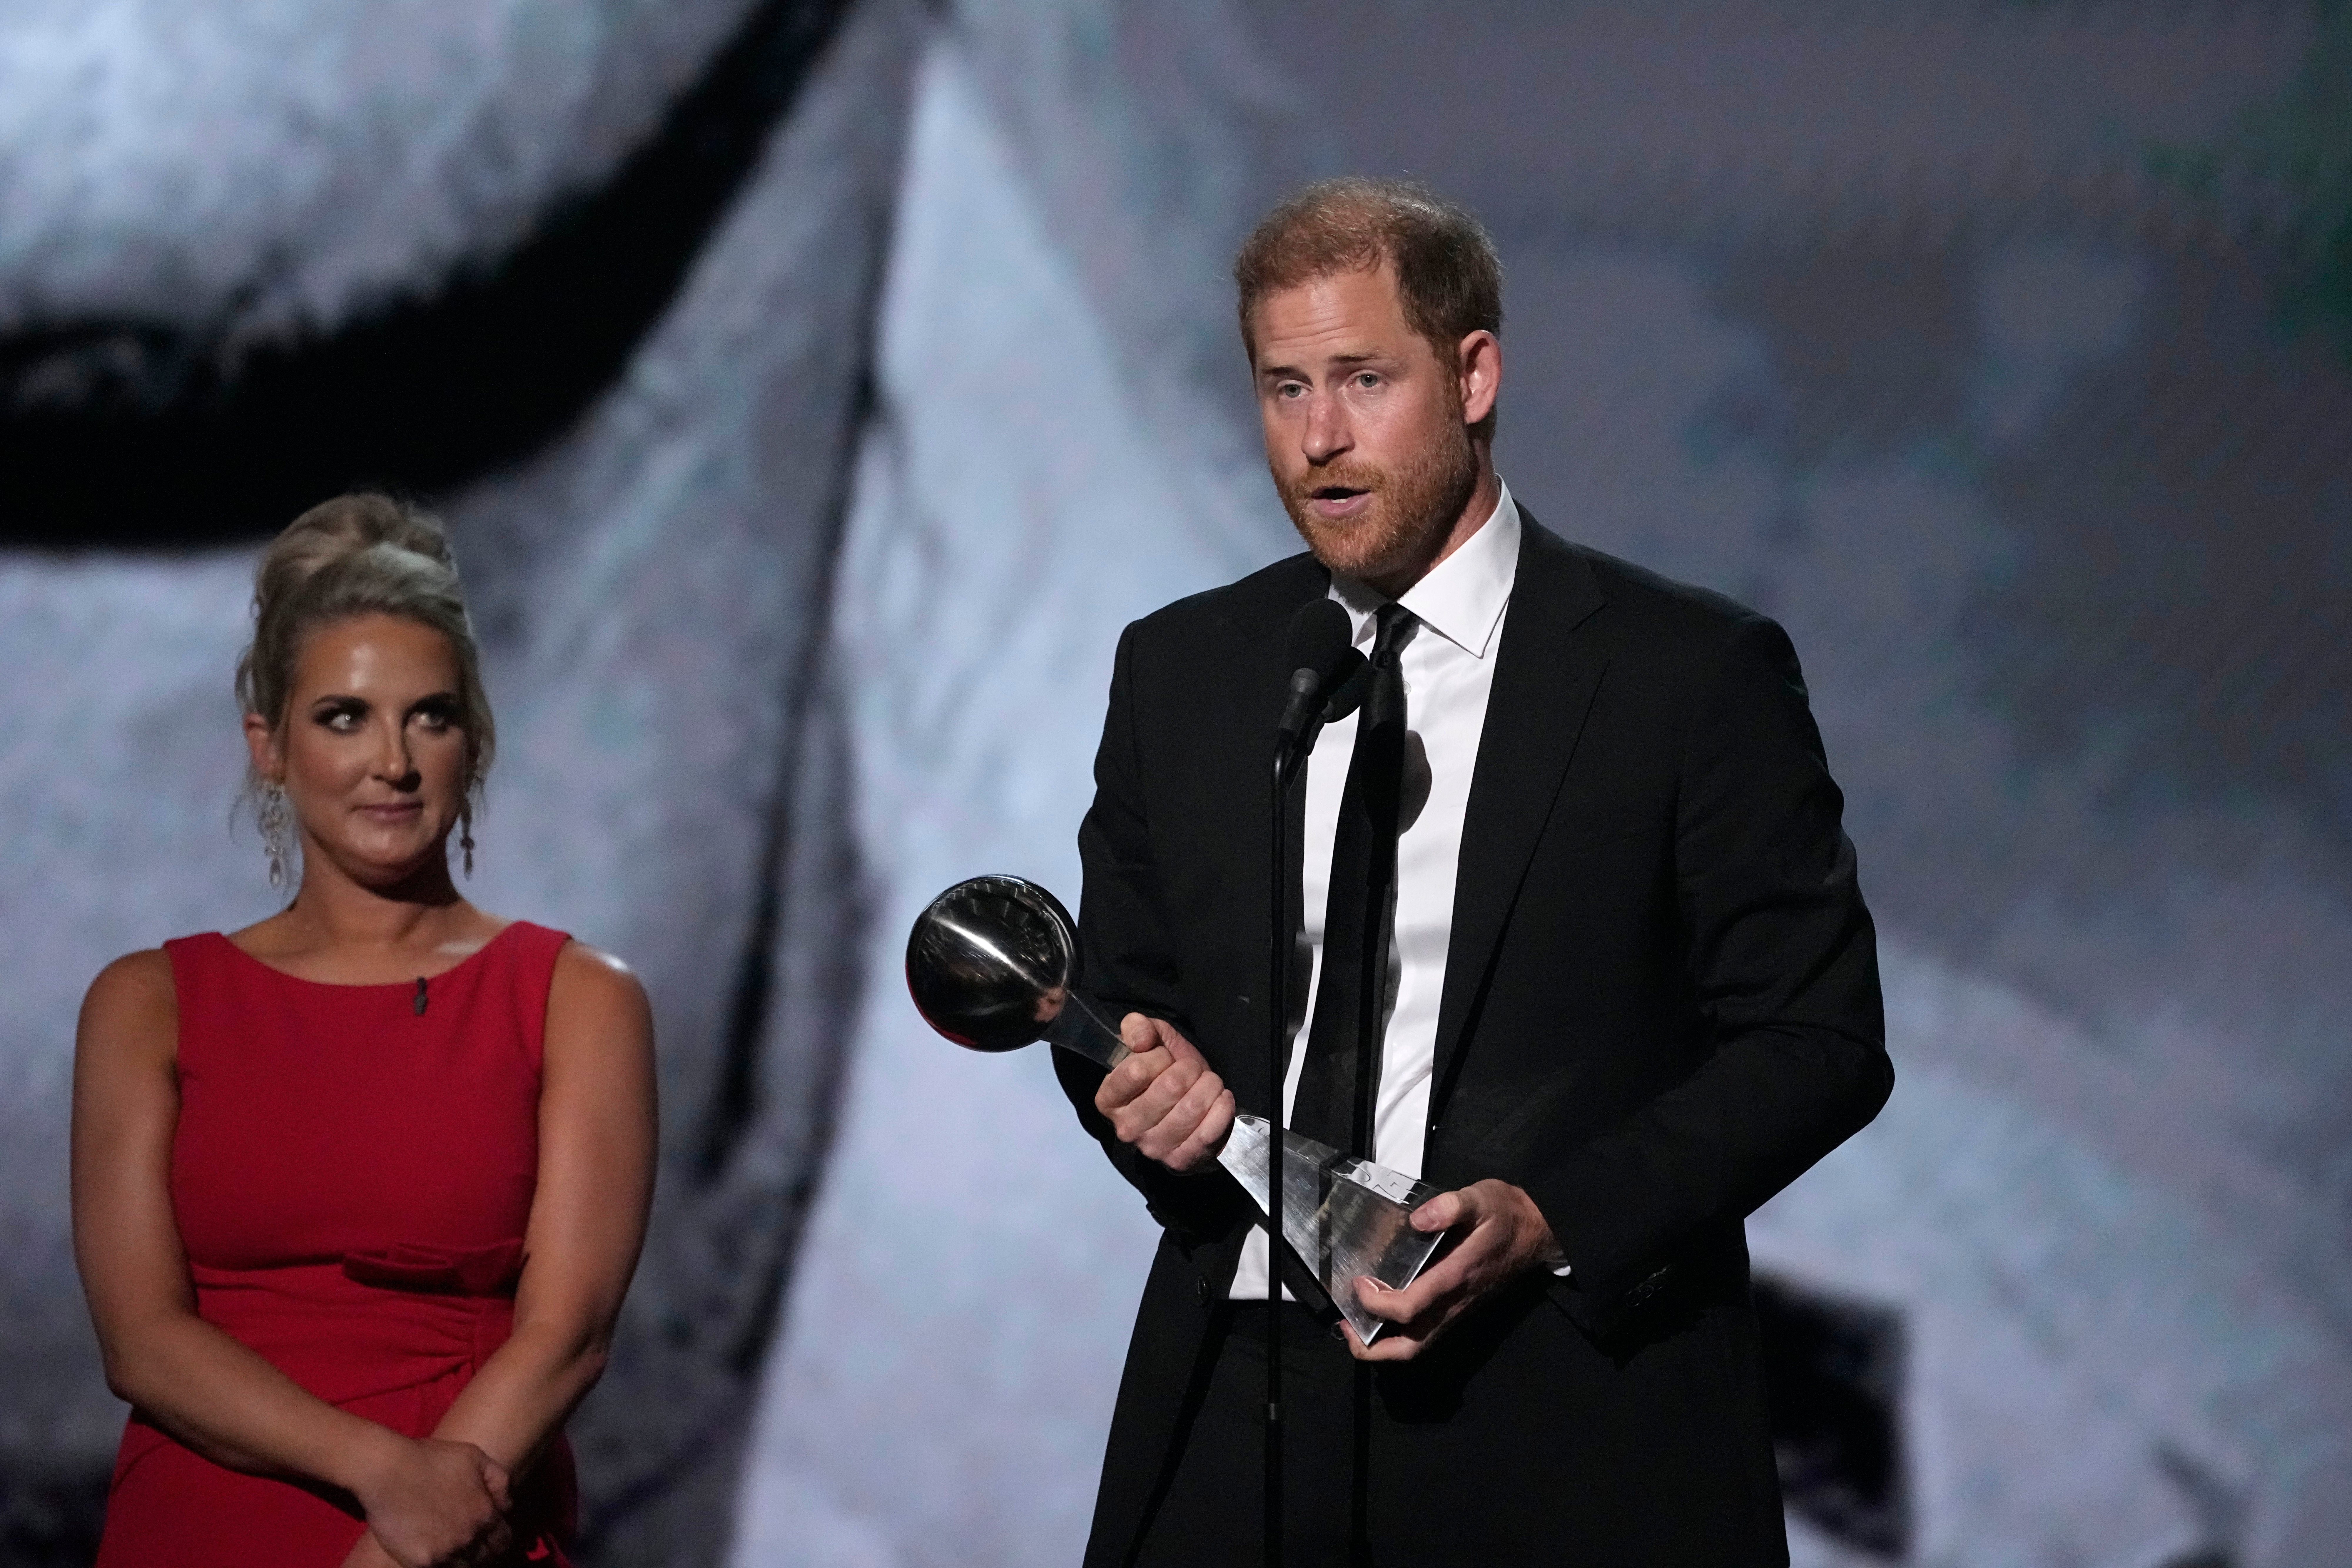 Prince Harry speaks after receiving the Pat Tillman Award For Service at the ESPY Awards (Mark J Terrill/AP)